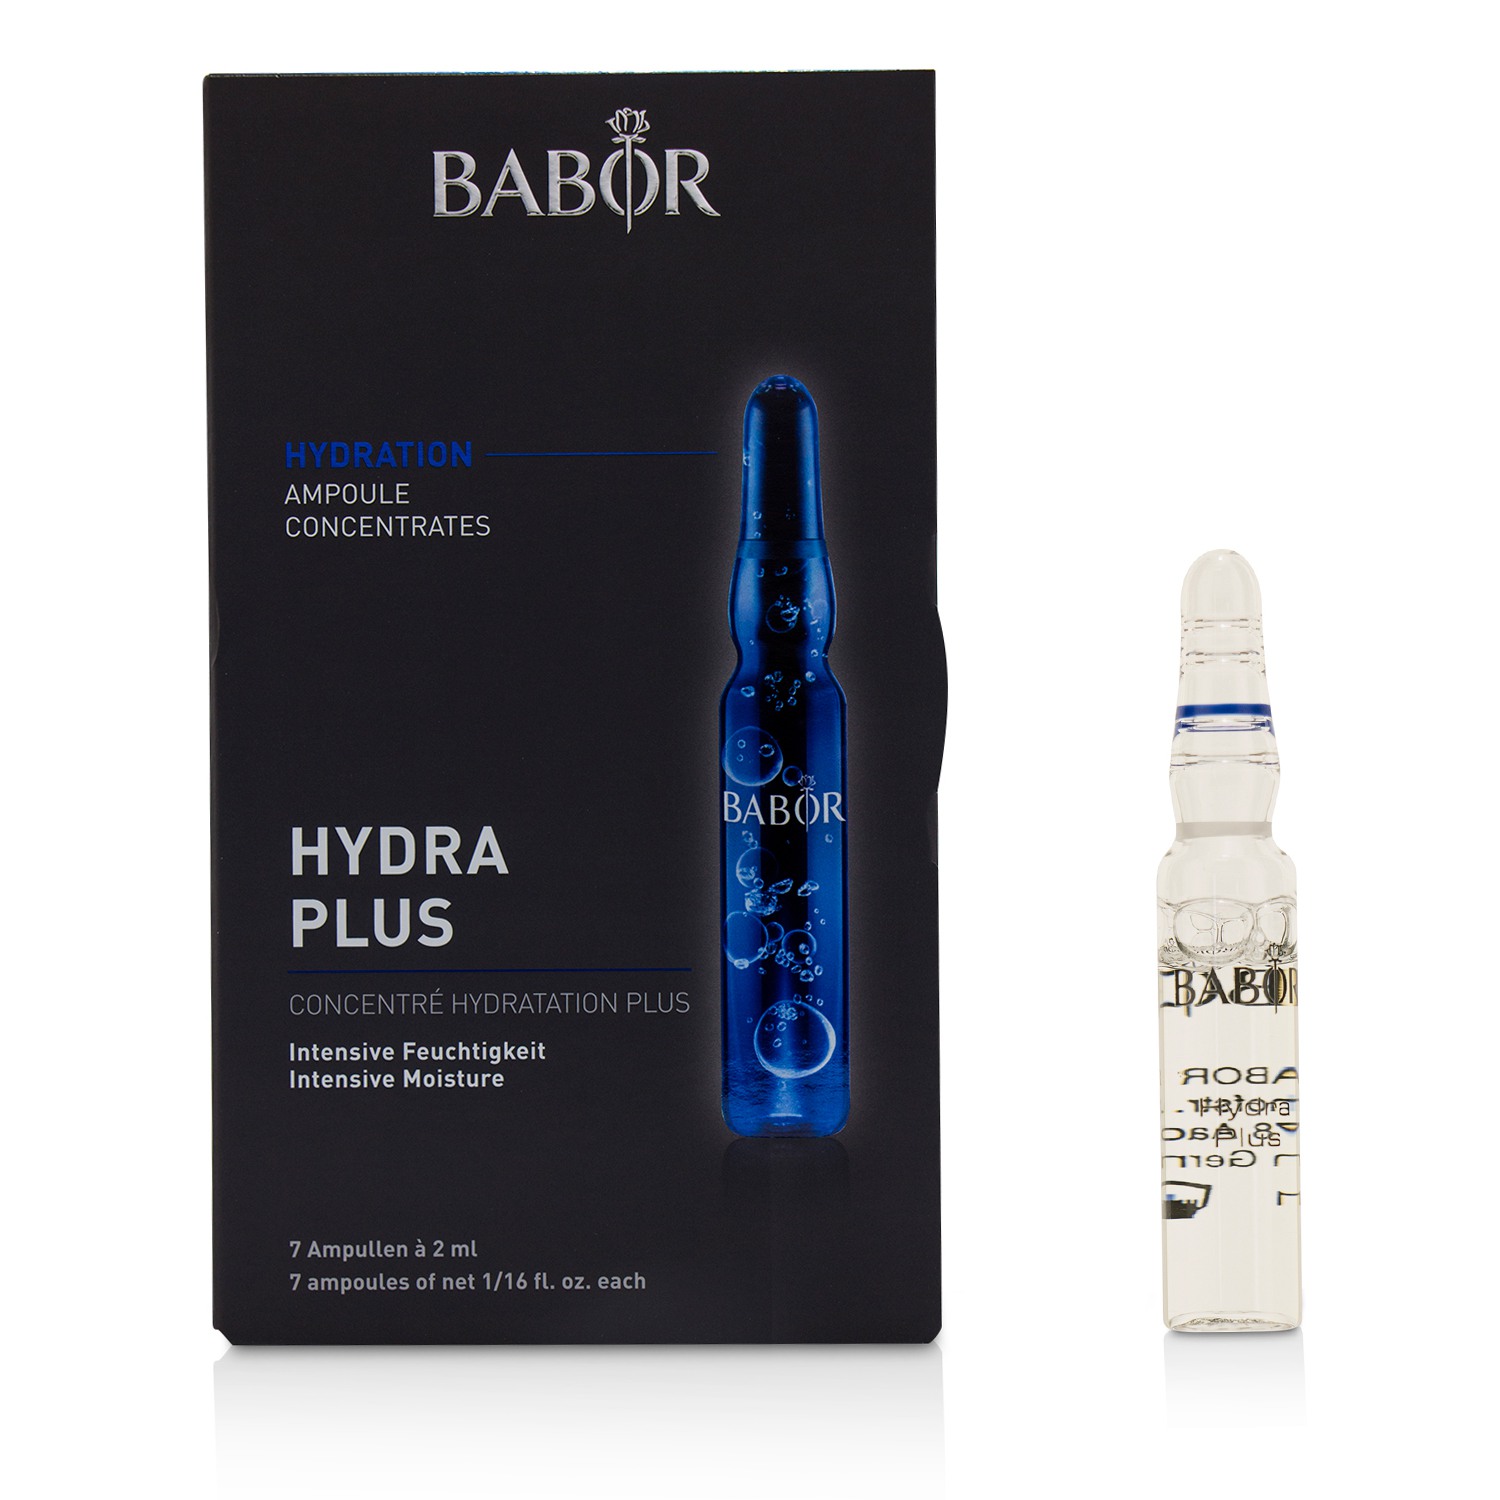 Ampoule Concentrates Hydration Hydra Plus (Intensive Moisture) - For Dry Dehydrated Skin Babor Image